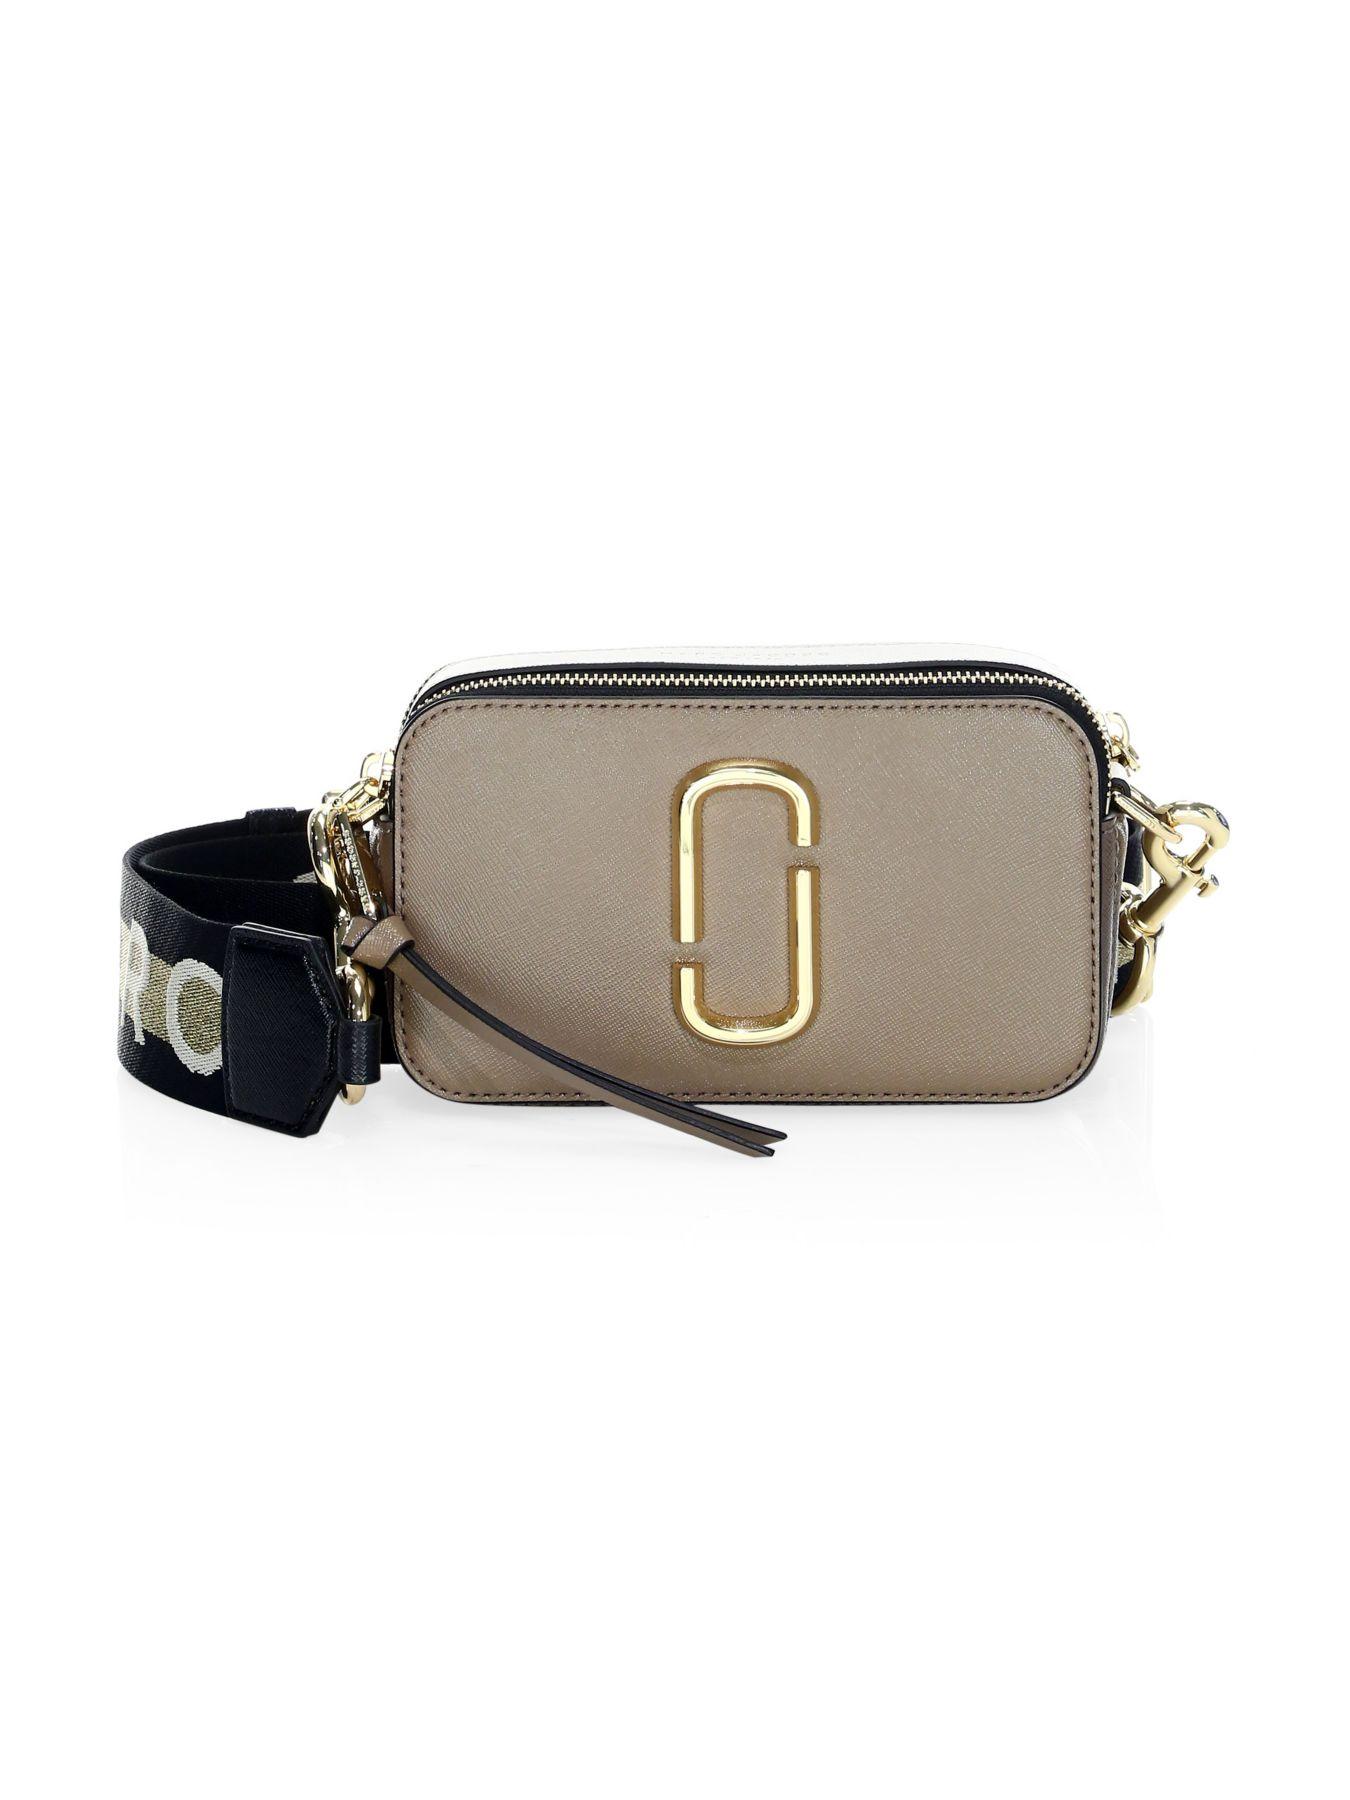 Marc Jacobs The Snapshot Leather Camera Bag in French Grey (Gray) - Lyst